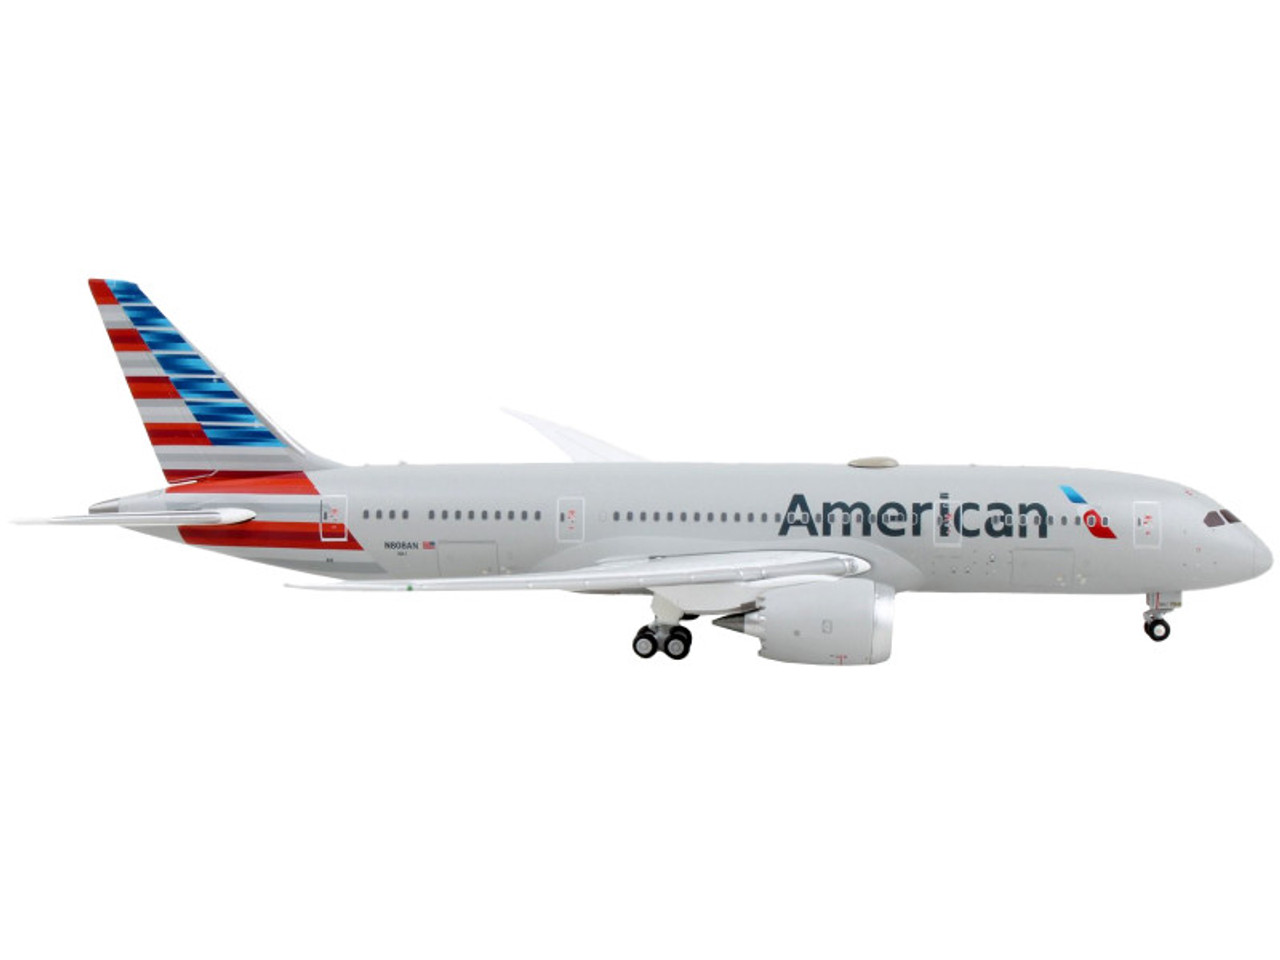 Boeing 787-8 Commercial Aircraft "American Airlines" Gray with Striped Tail 1/400 Diecast Model Airplane by GeminiJets